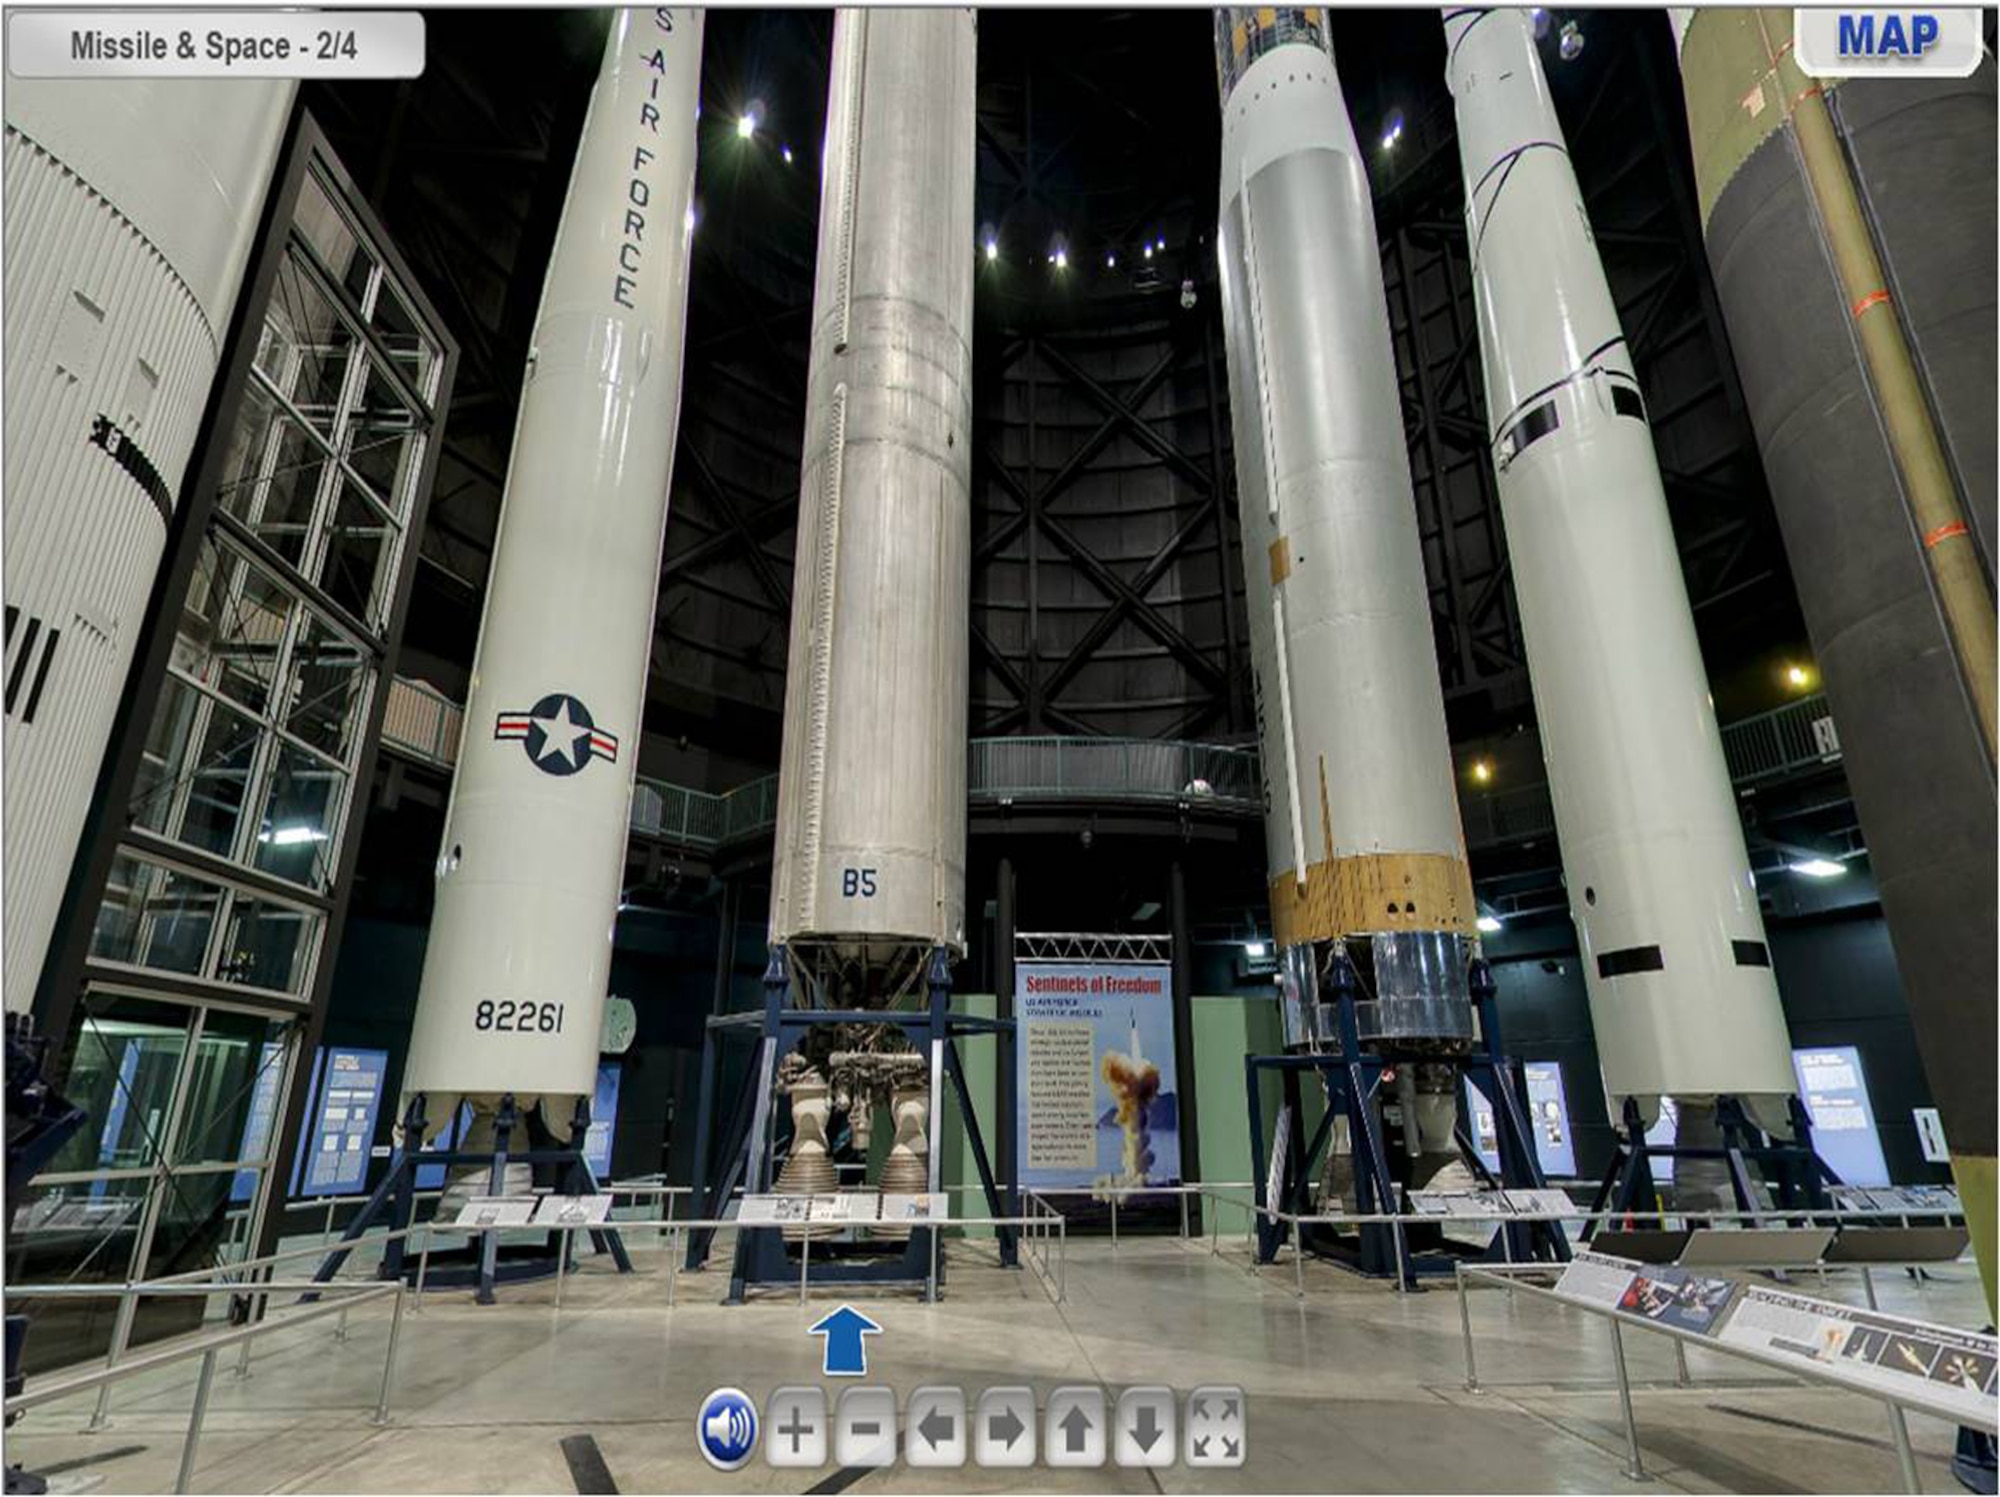 This screenshot shows the Missile and Space Gallery from the National Museum of the U.S. Air Force's Virtual Tour website. (U.S. Air Force image)